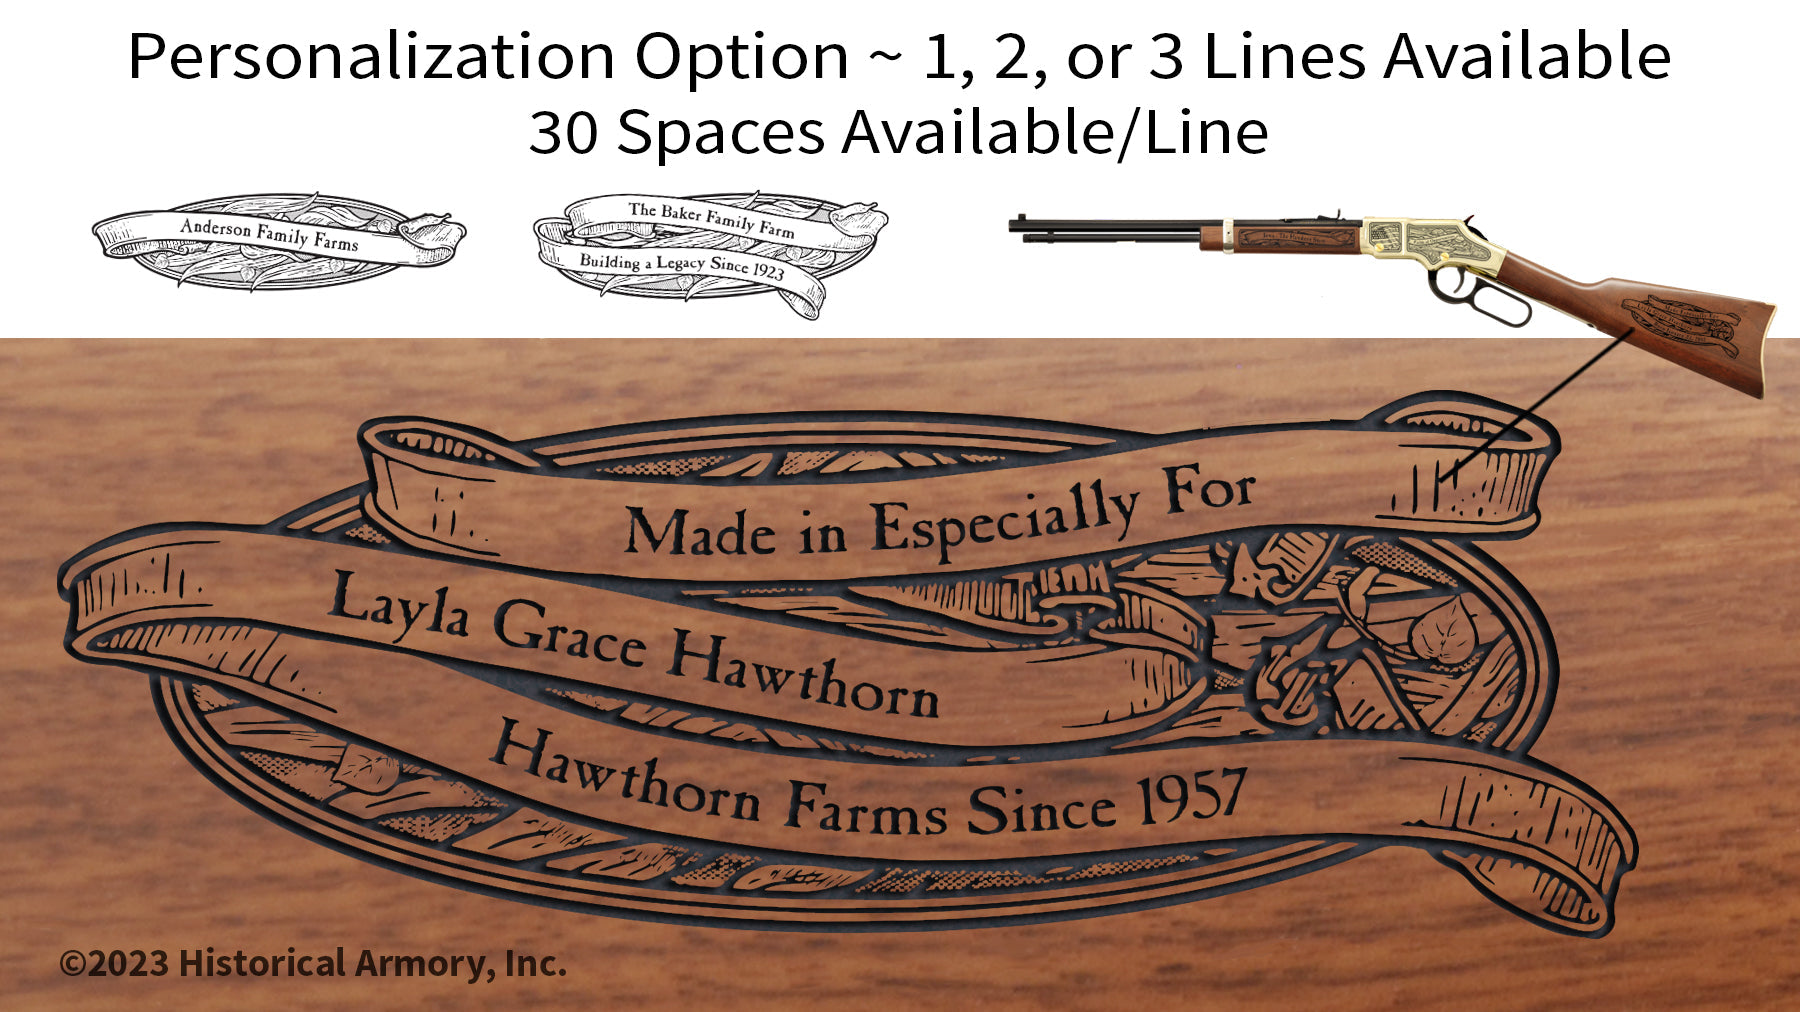 Minnesota Agricultural Heritage Engraved Rifle Personalization